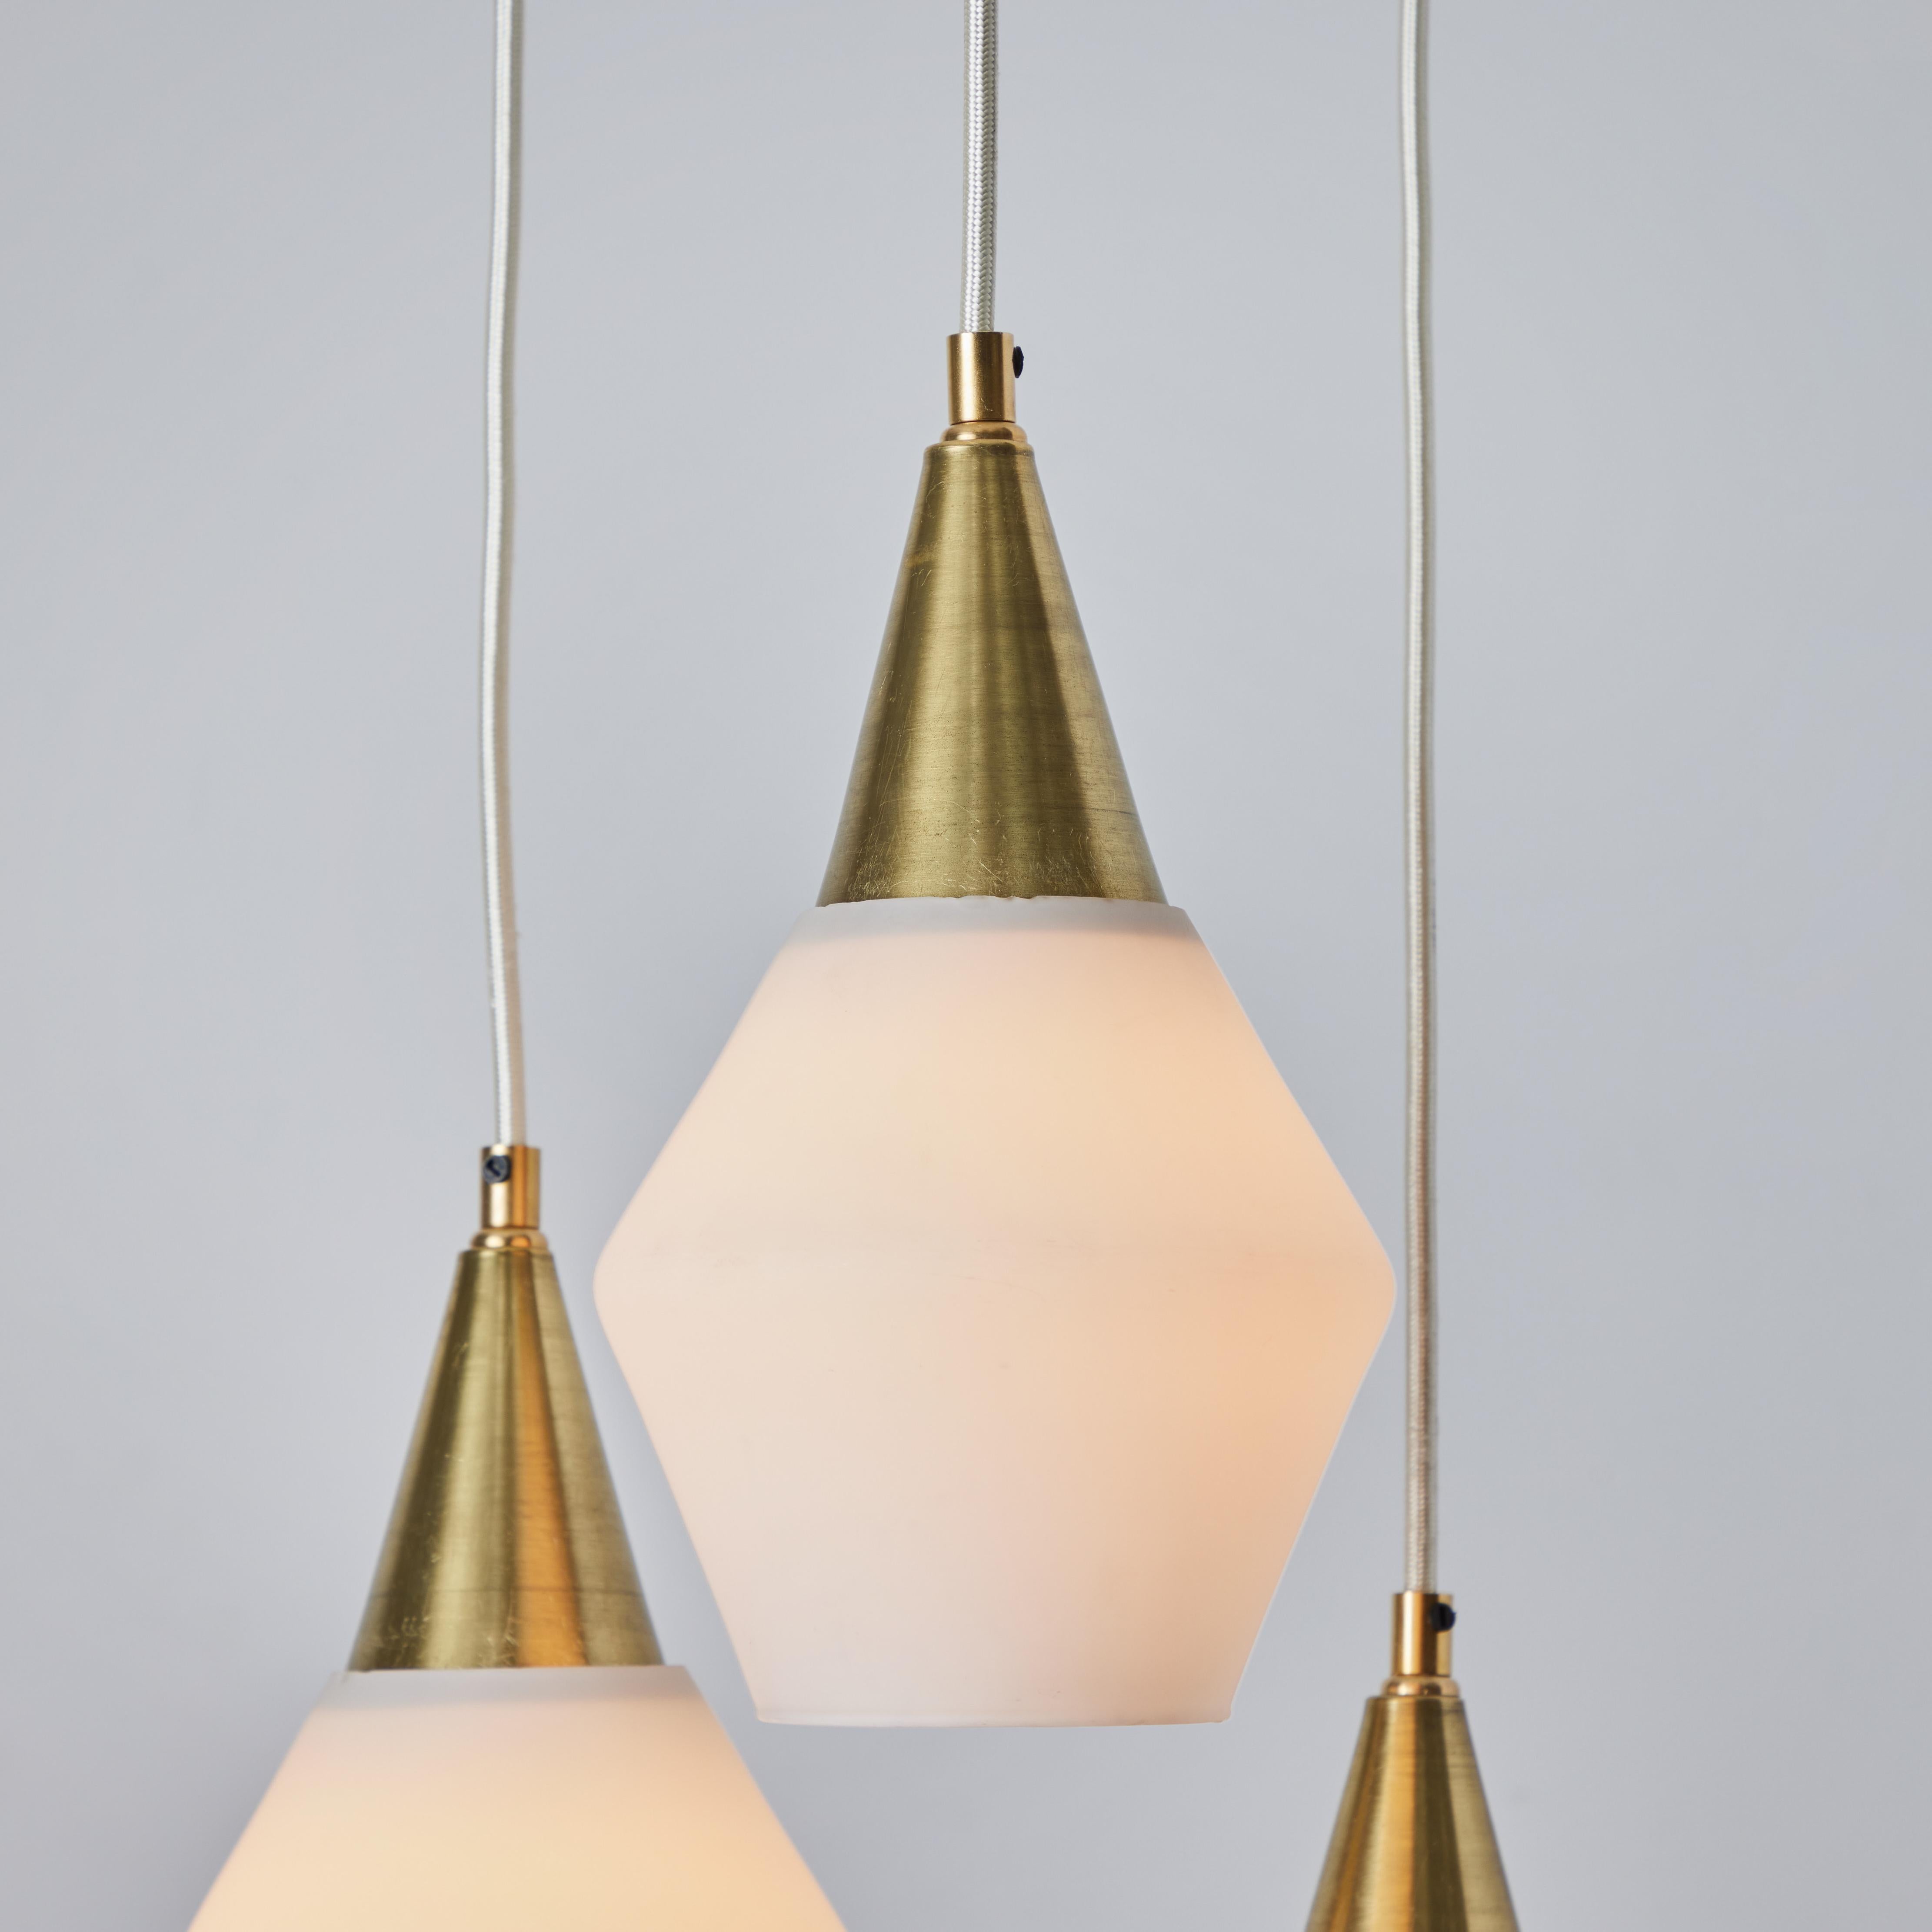 1960s Opaline Glass and Brass Chandelier Attributed to Mauri Almari for Idman For Sale 8